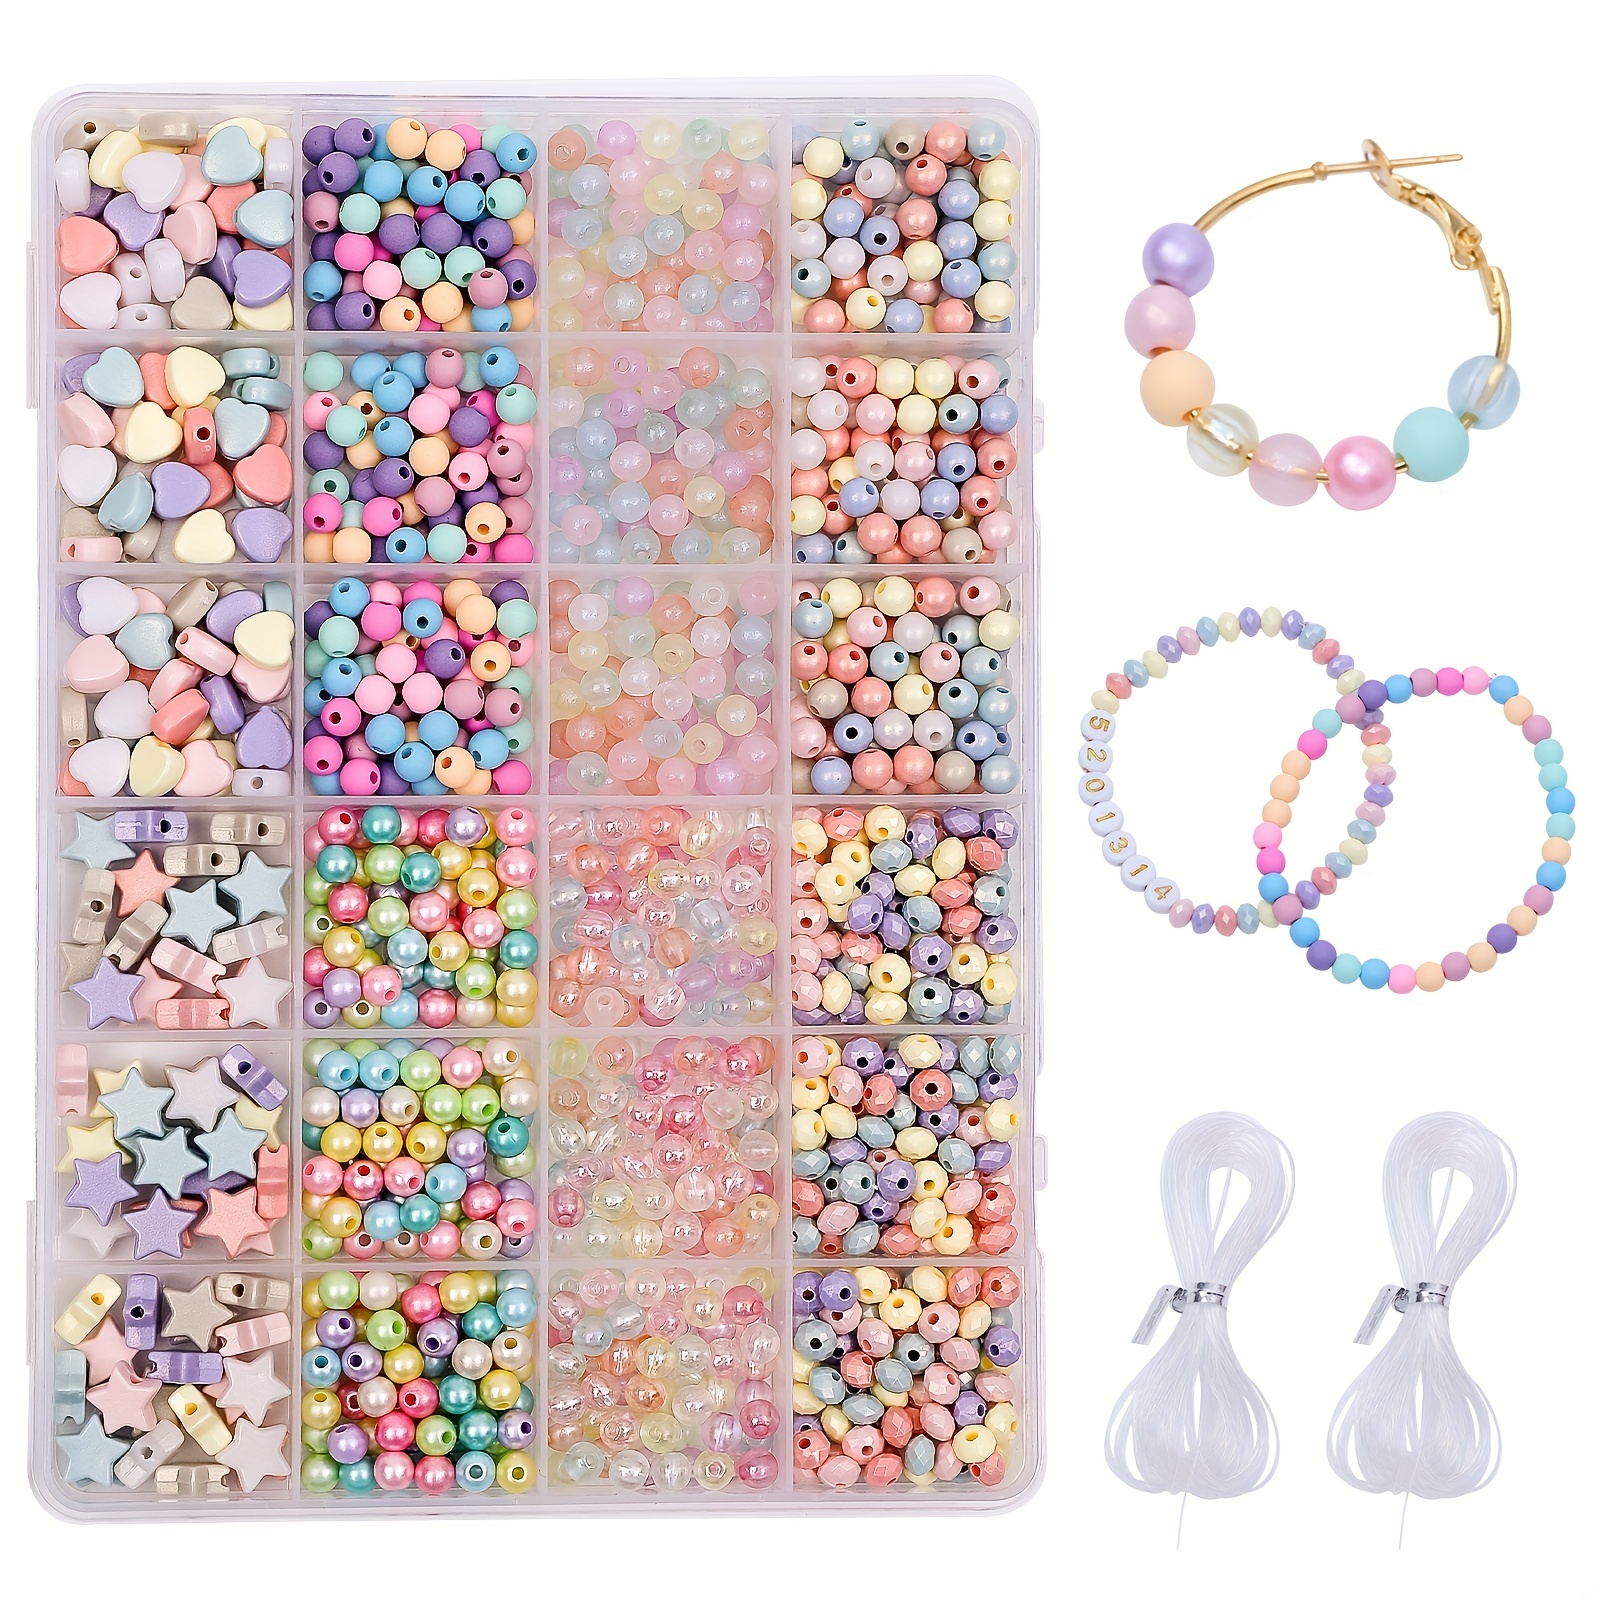  Waist Beads Kit, Waist Bead Spinner, Making Bead Holder, Bead  Spinner Set with 2/4 Bowls, 2 Needles and 1000Pcs Beads Spinner, Seed Beads  for DIY Jewelry Making Kit Craft Stringing Beads